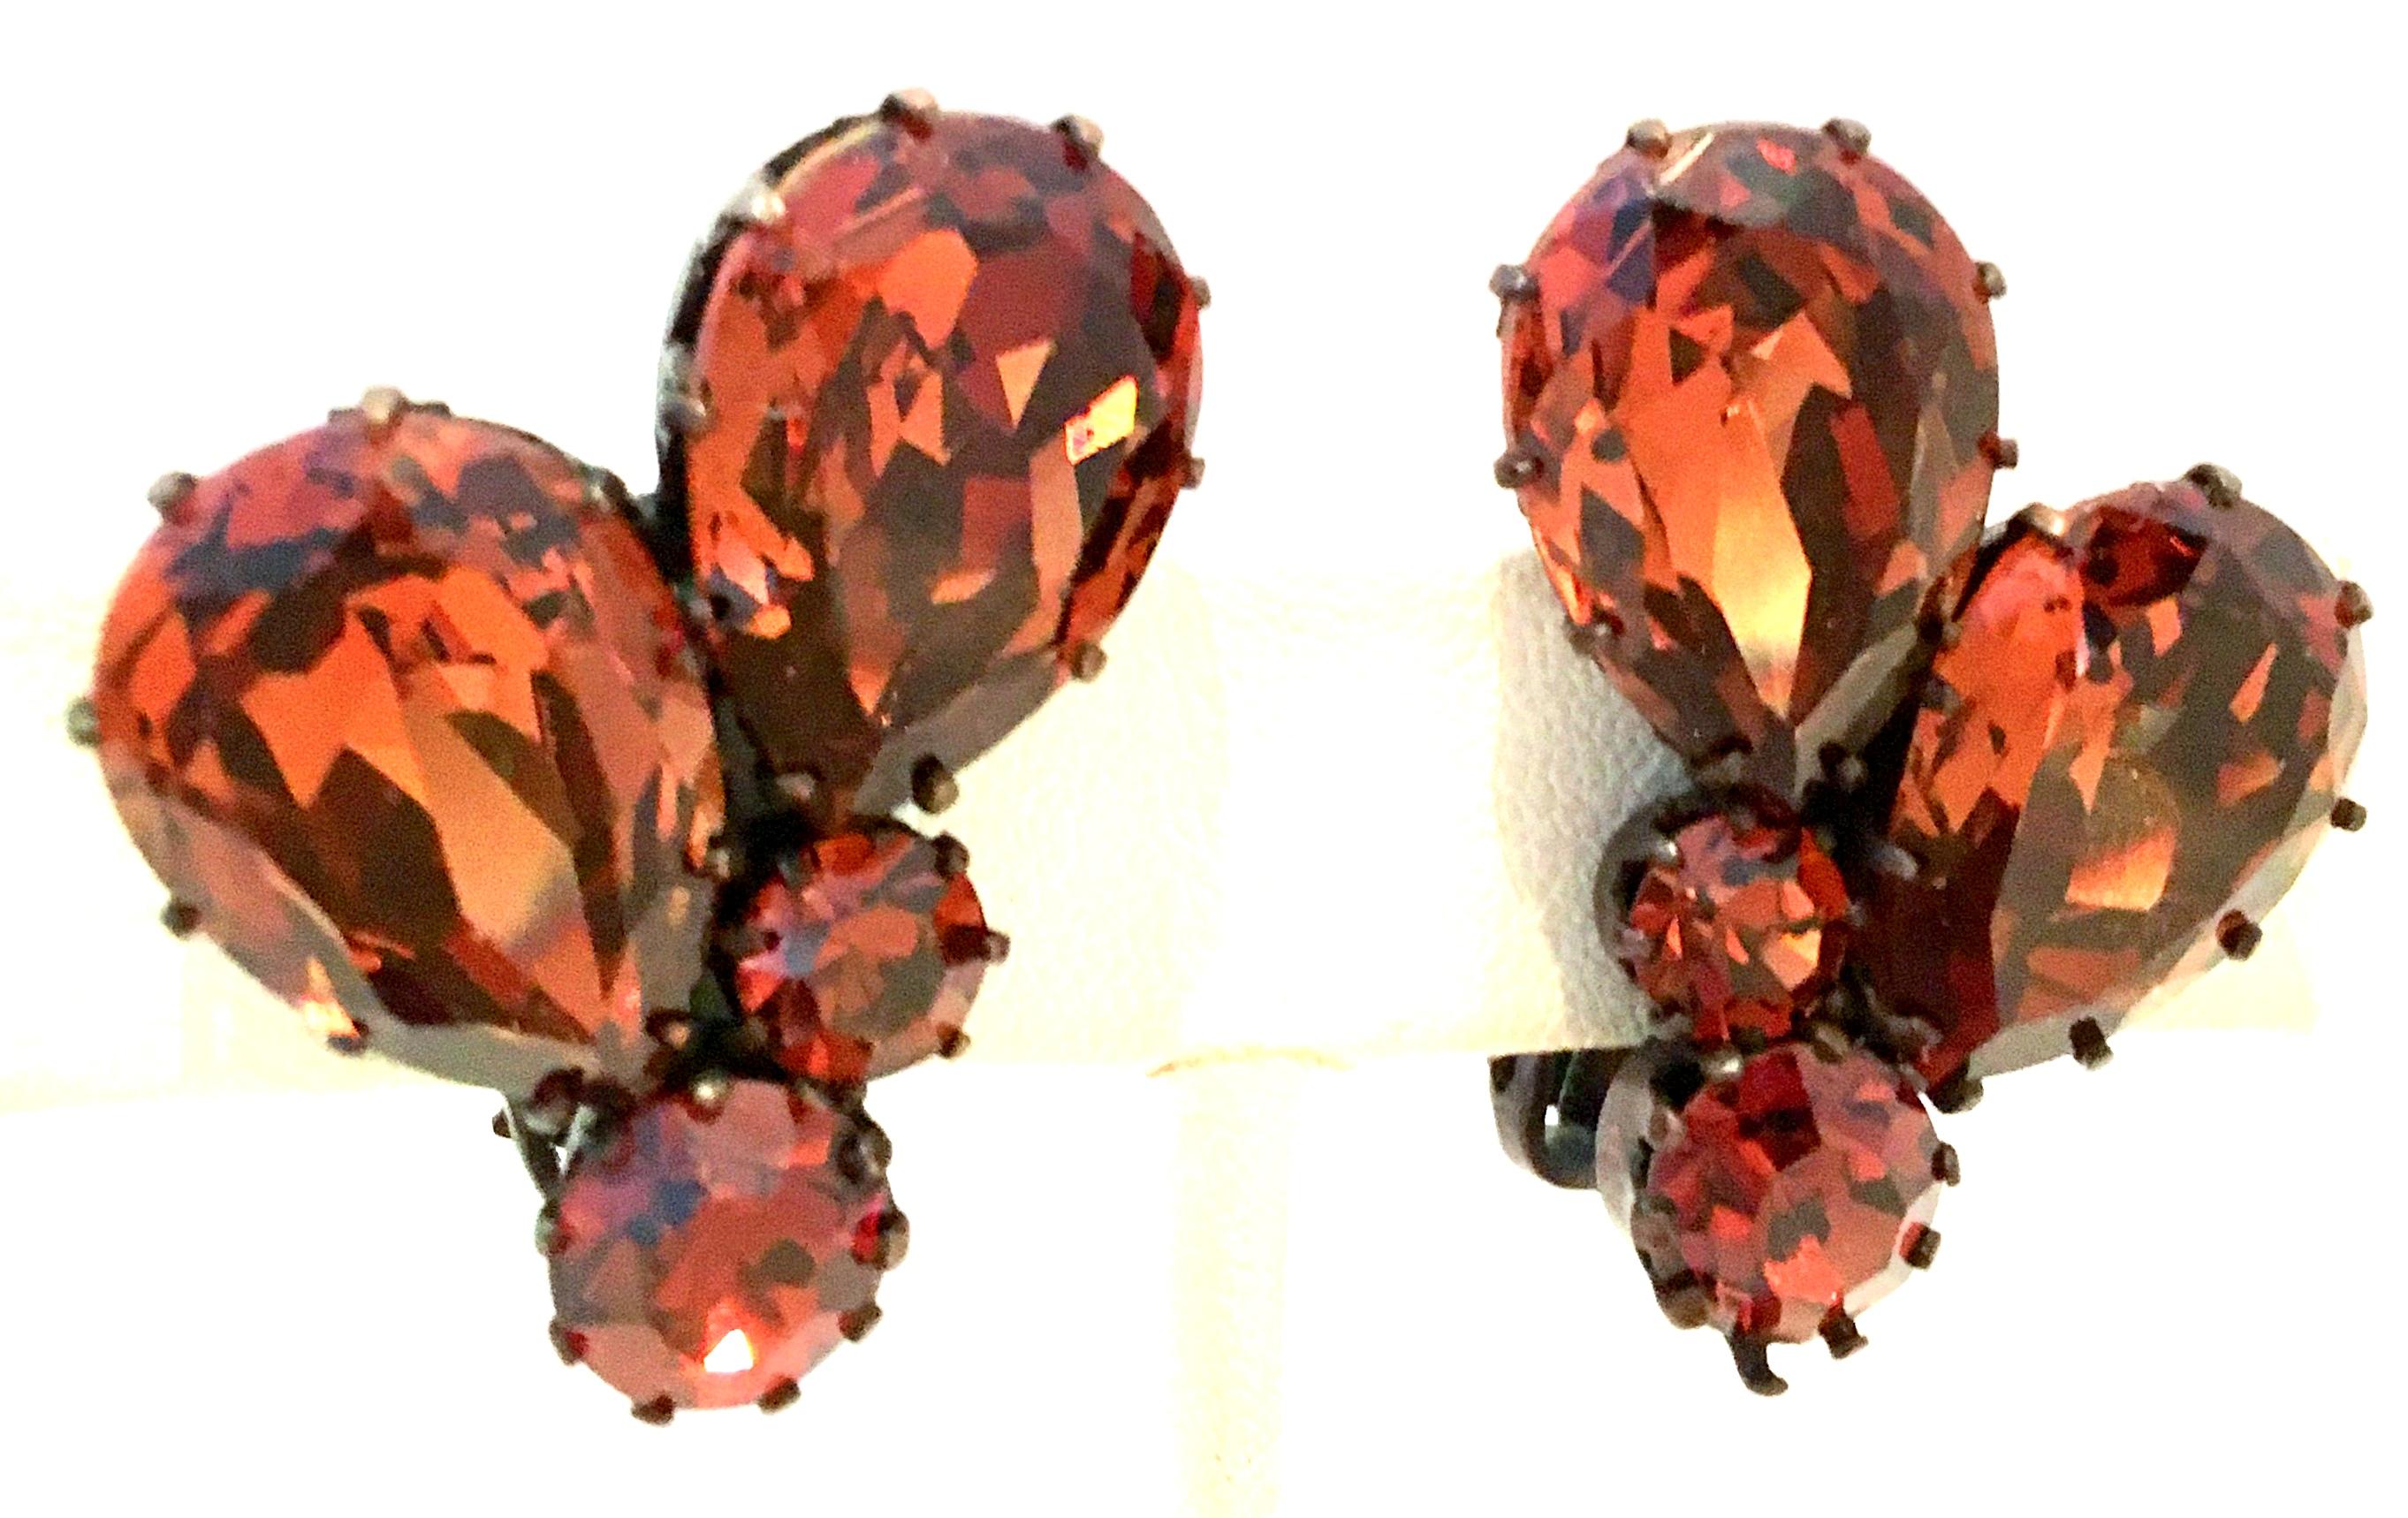 Mid-20th Century Pair Of Austrian Crystal Earrings-Signed. This Right/Left designed pair of earrings features deep amber brilliant cut and faceted stones set in fancy prong antiqued bronzed plate metal.
Each clip style earring is signed, Made In